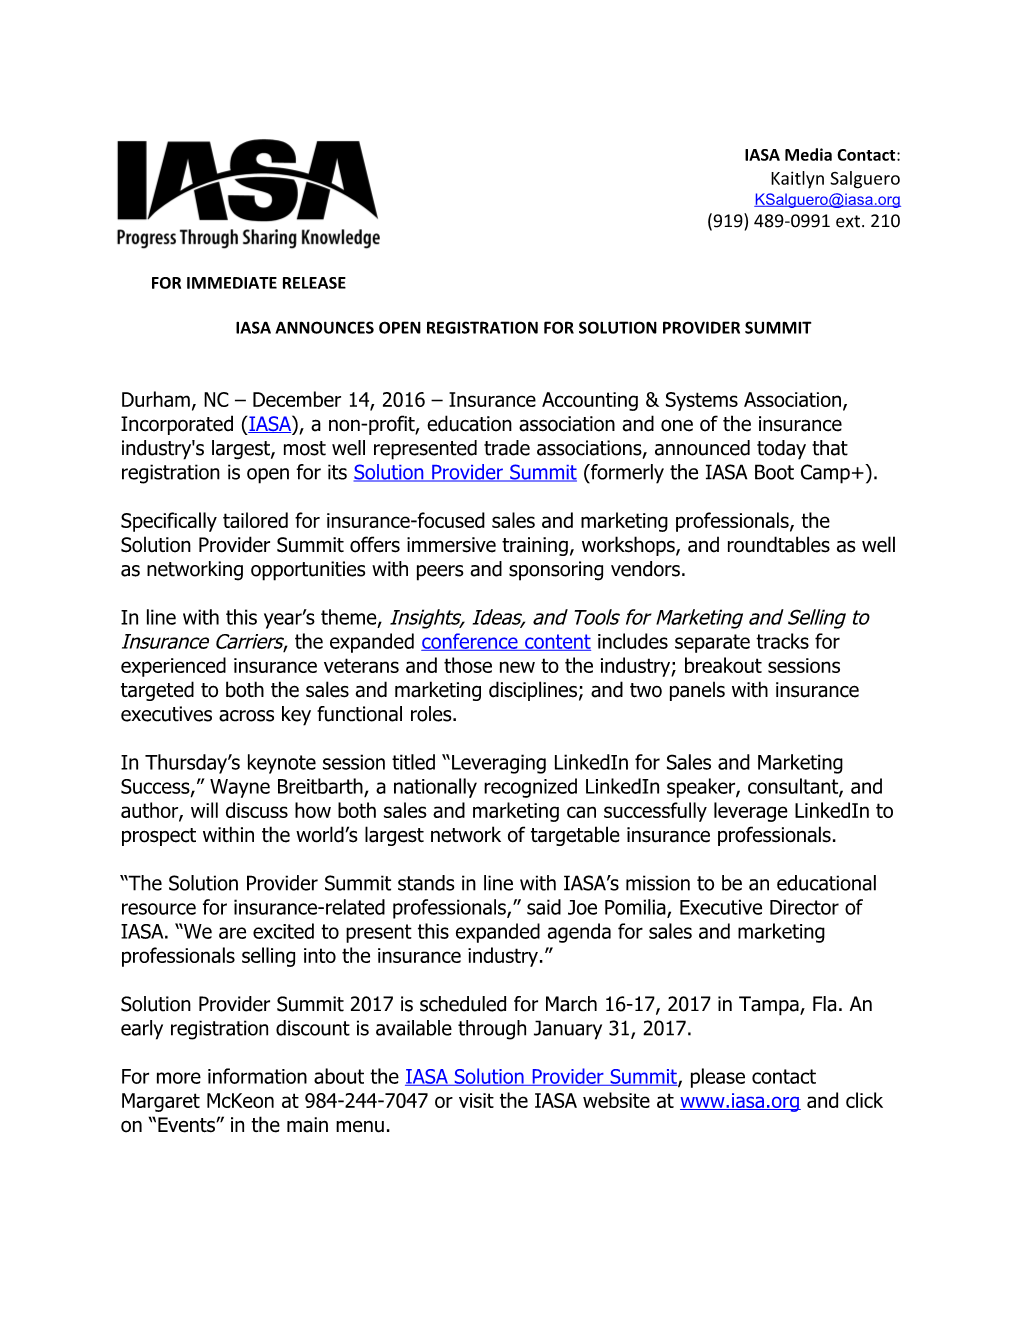 Iasa Announces Open Registration for Solution Provider Summit